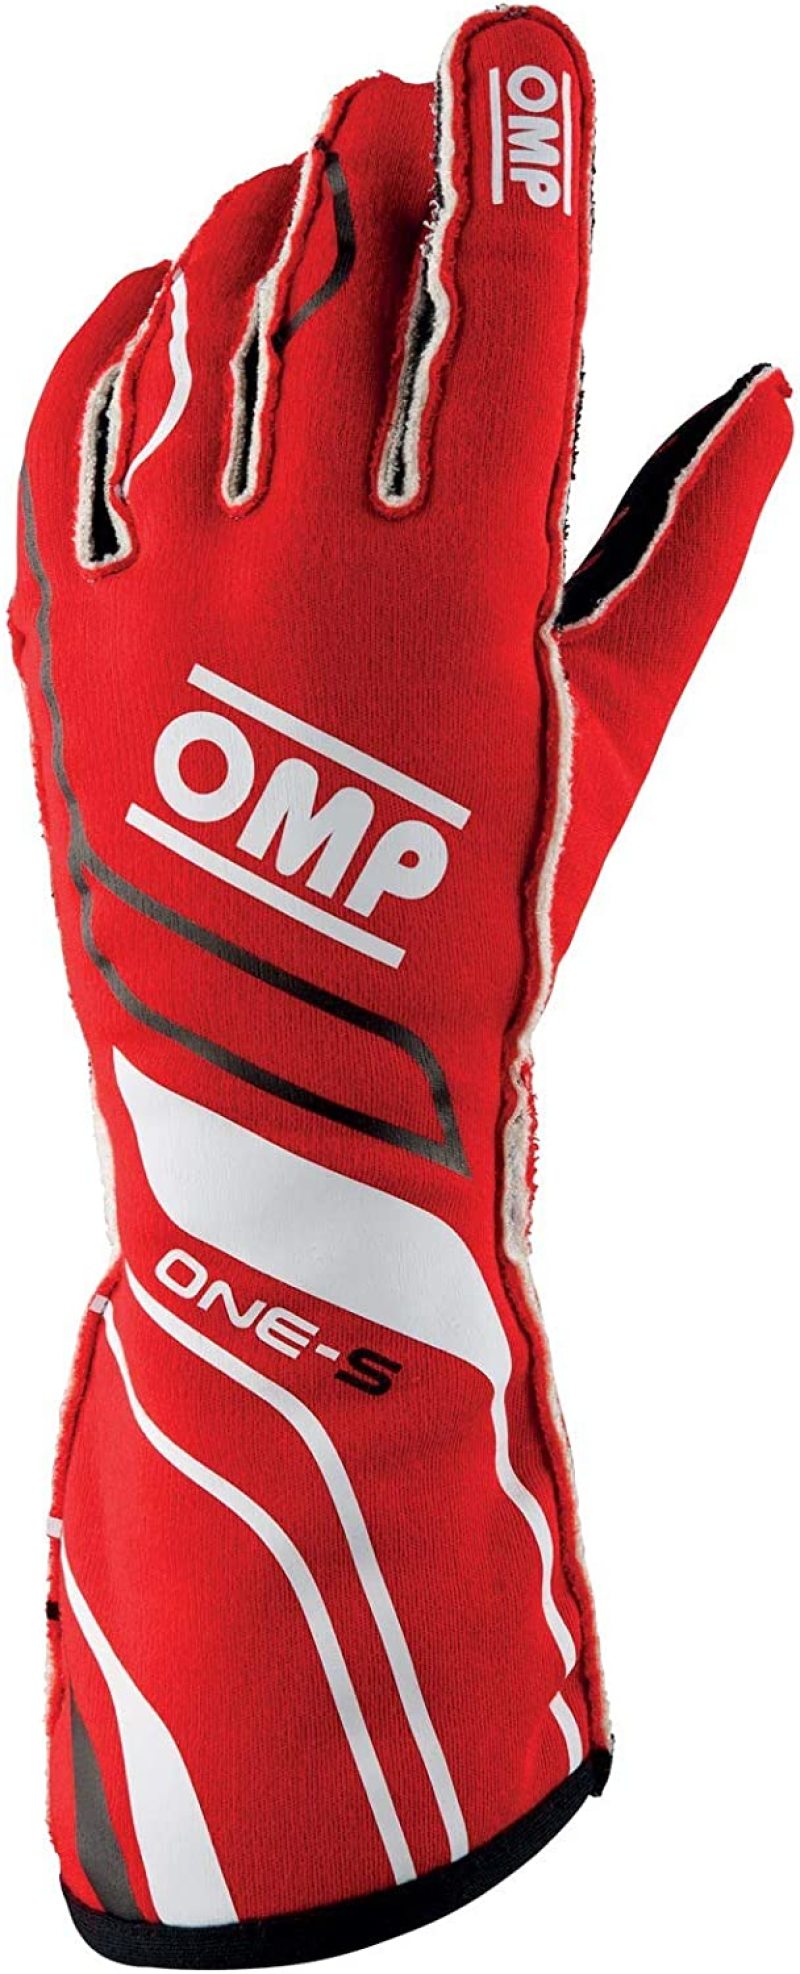 OMP One-S Gloves Red - Size L Fia 8556-2018 - IB0-0770-A01-061-L